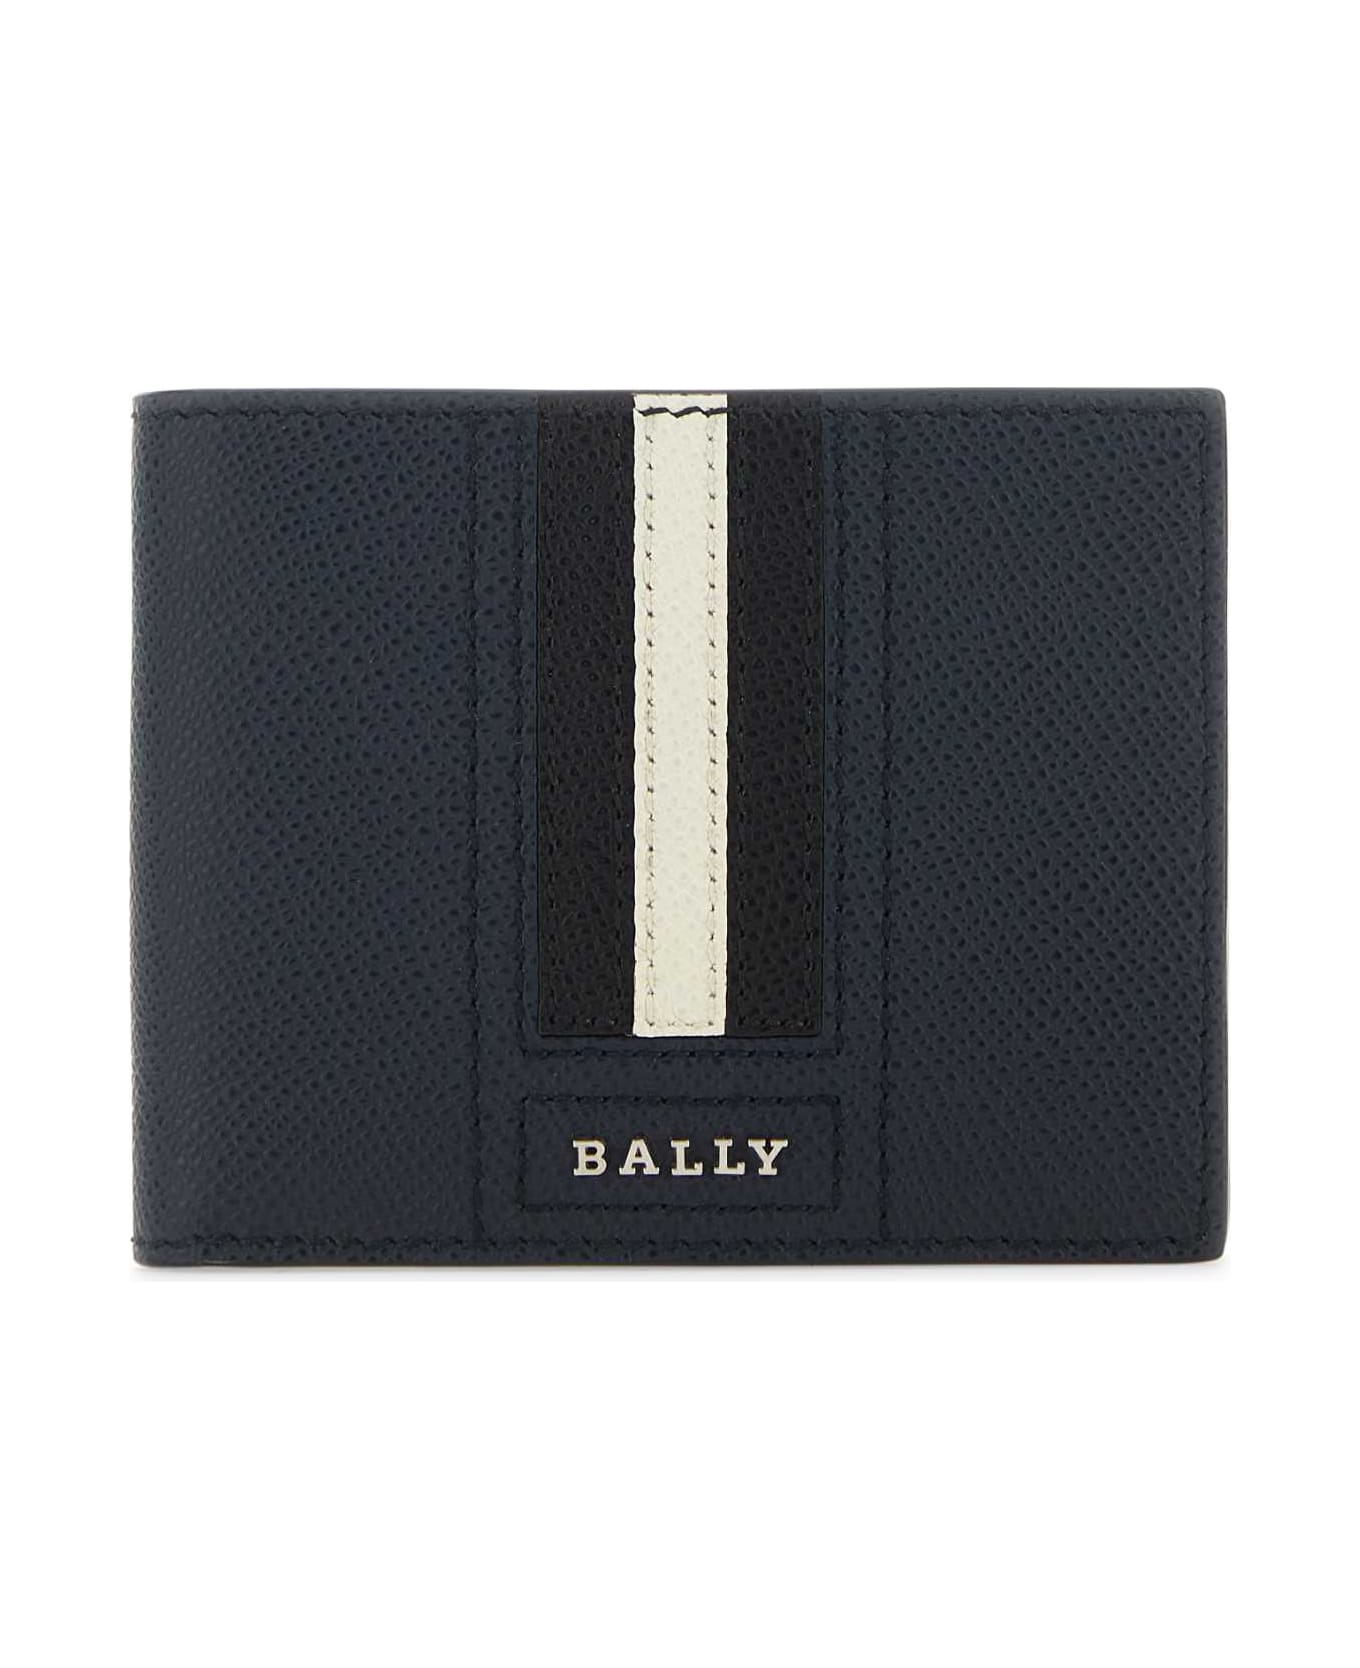 Bally Blue Leather Wallet - NEWBLUE